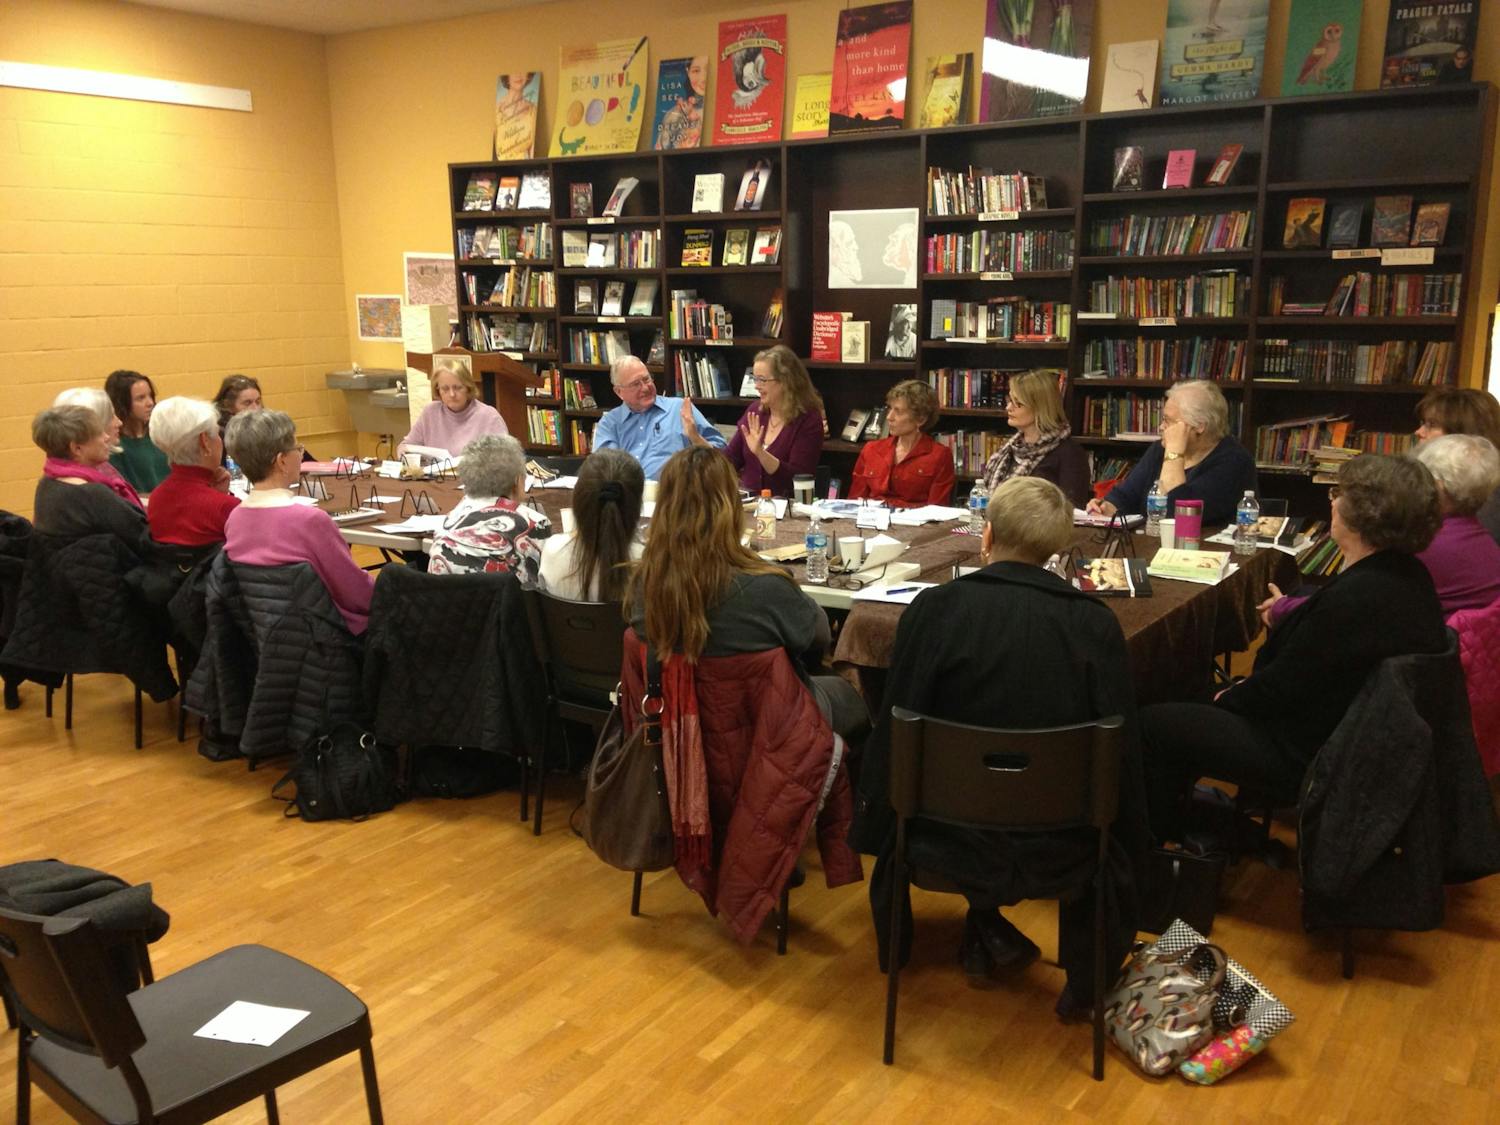 Carolina Public Humanities’ Great Books Reading Groups, would meet at Flyleaf books prior to COVID-19. In these groups, UNC lead discussions with community members on a diverse range of books. Photo courtesy of Victoria Breeden.